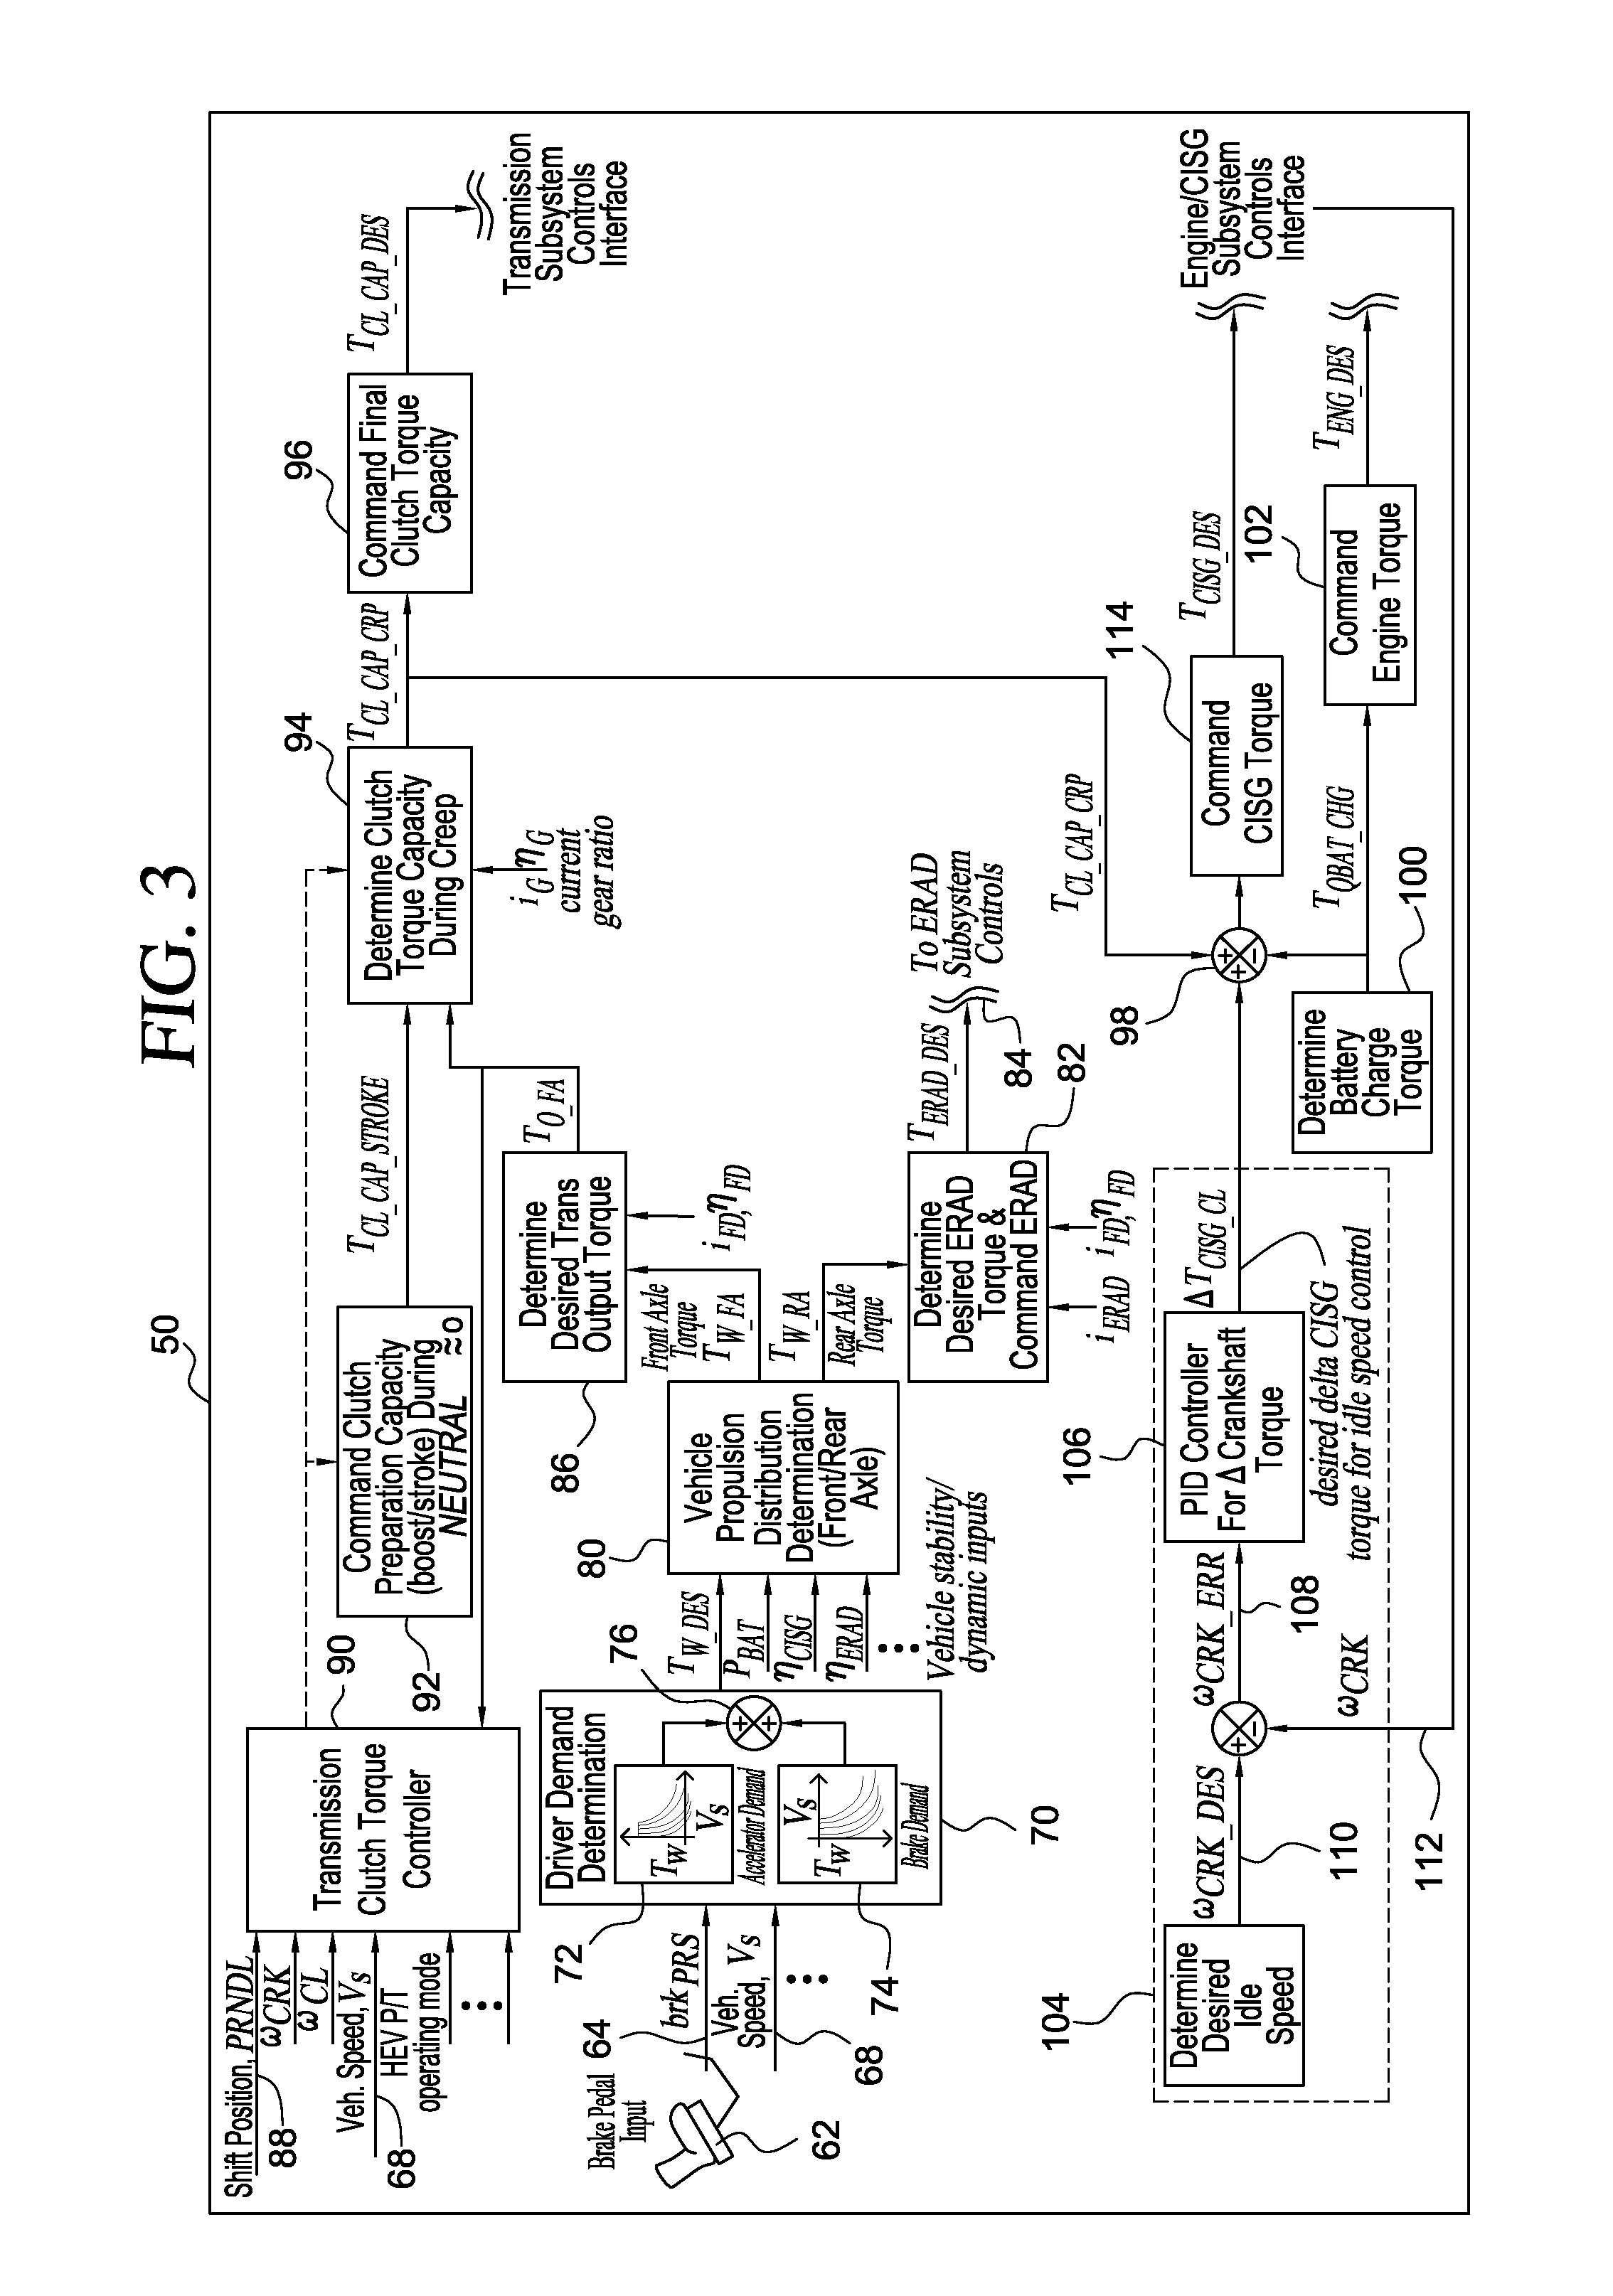 Vehicle Creep Control in a Hybrid Electric Vehicle